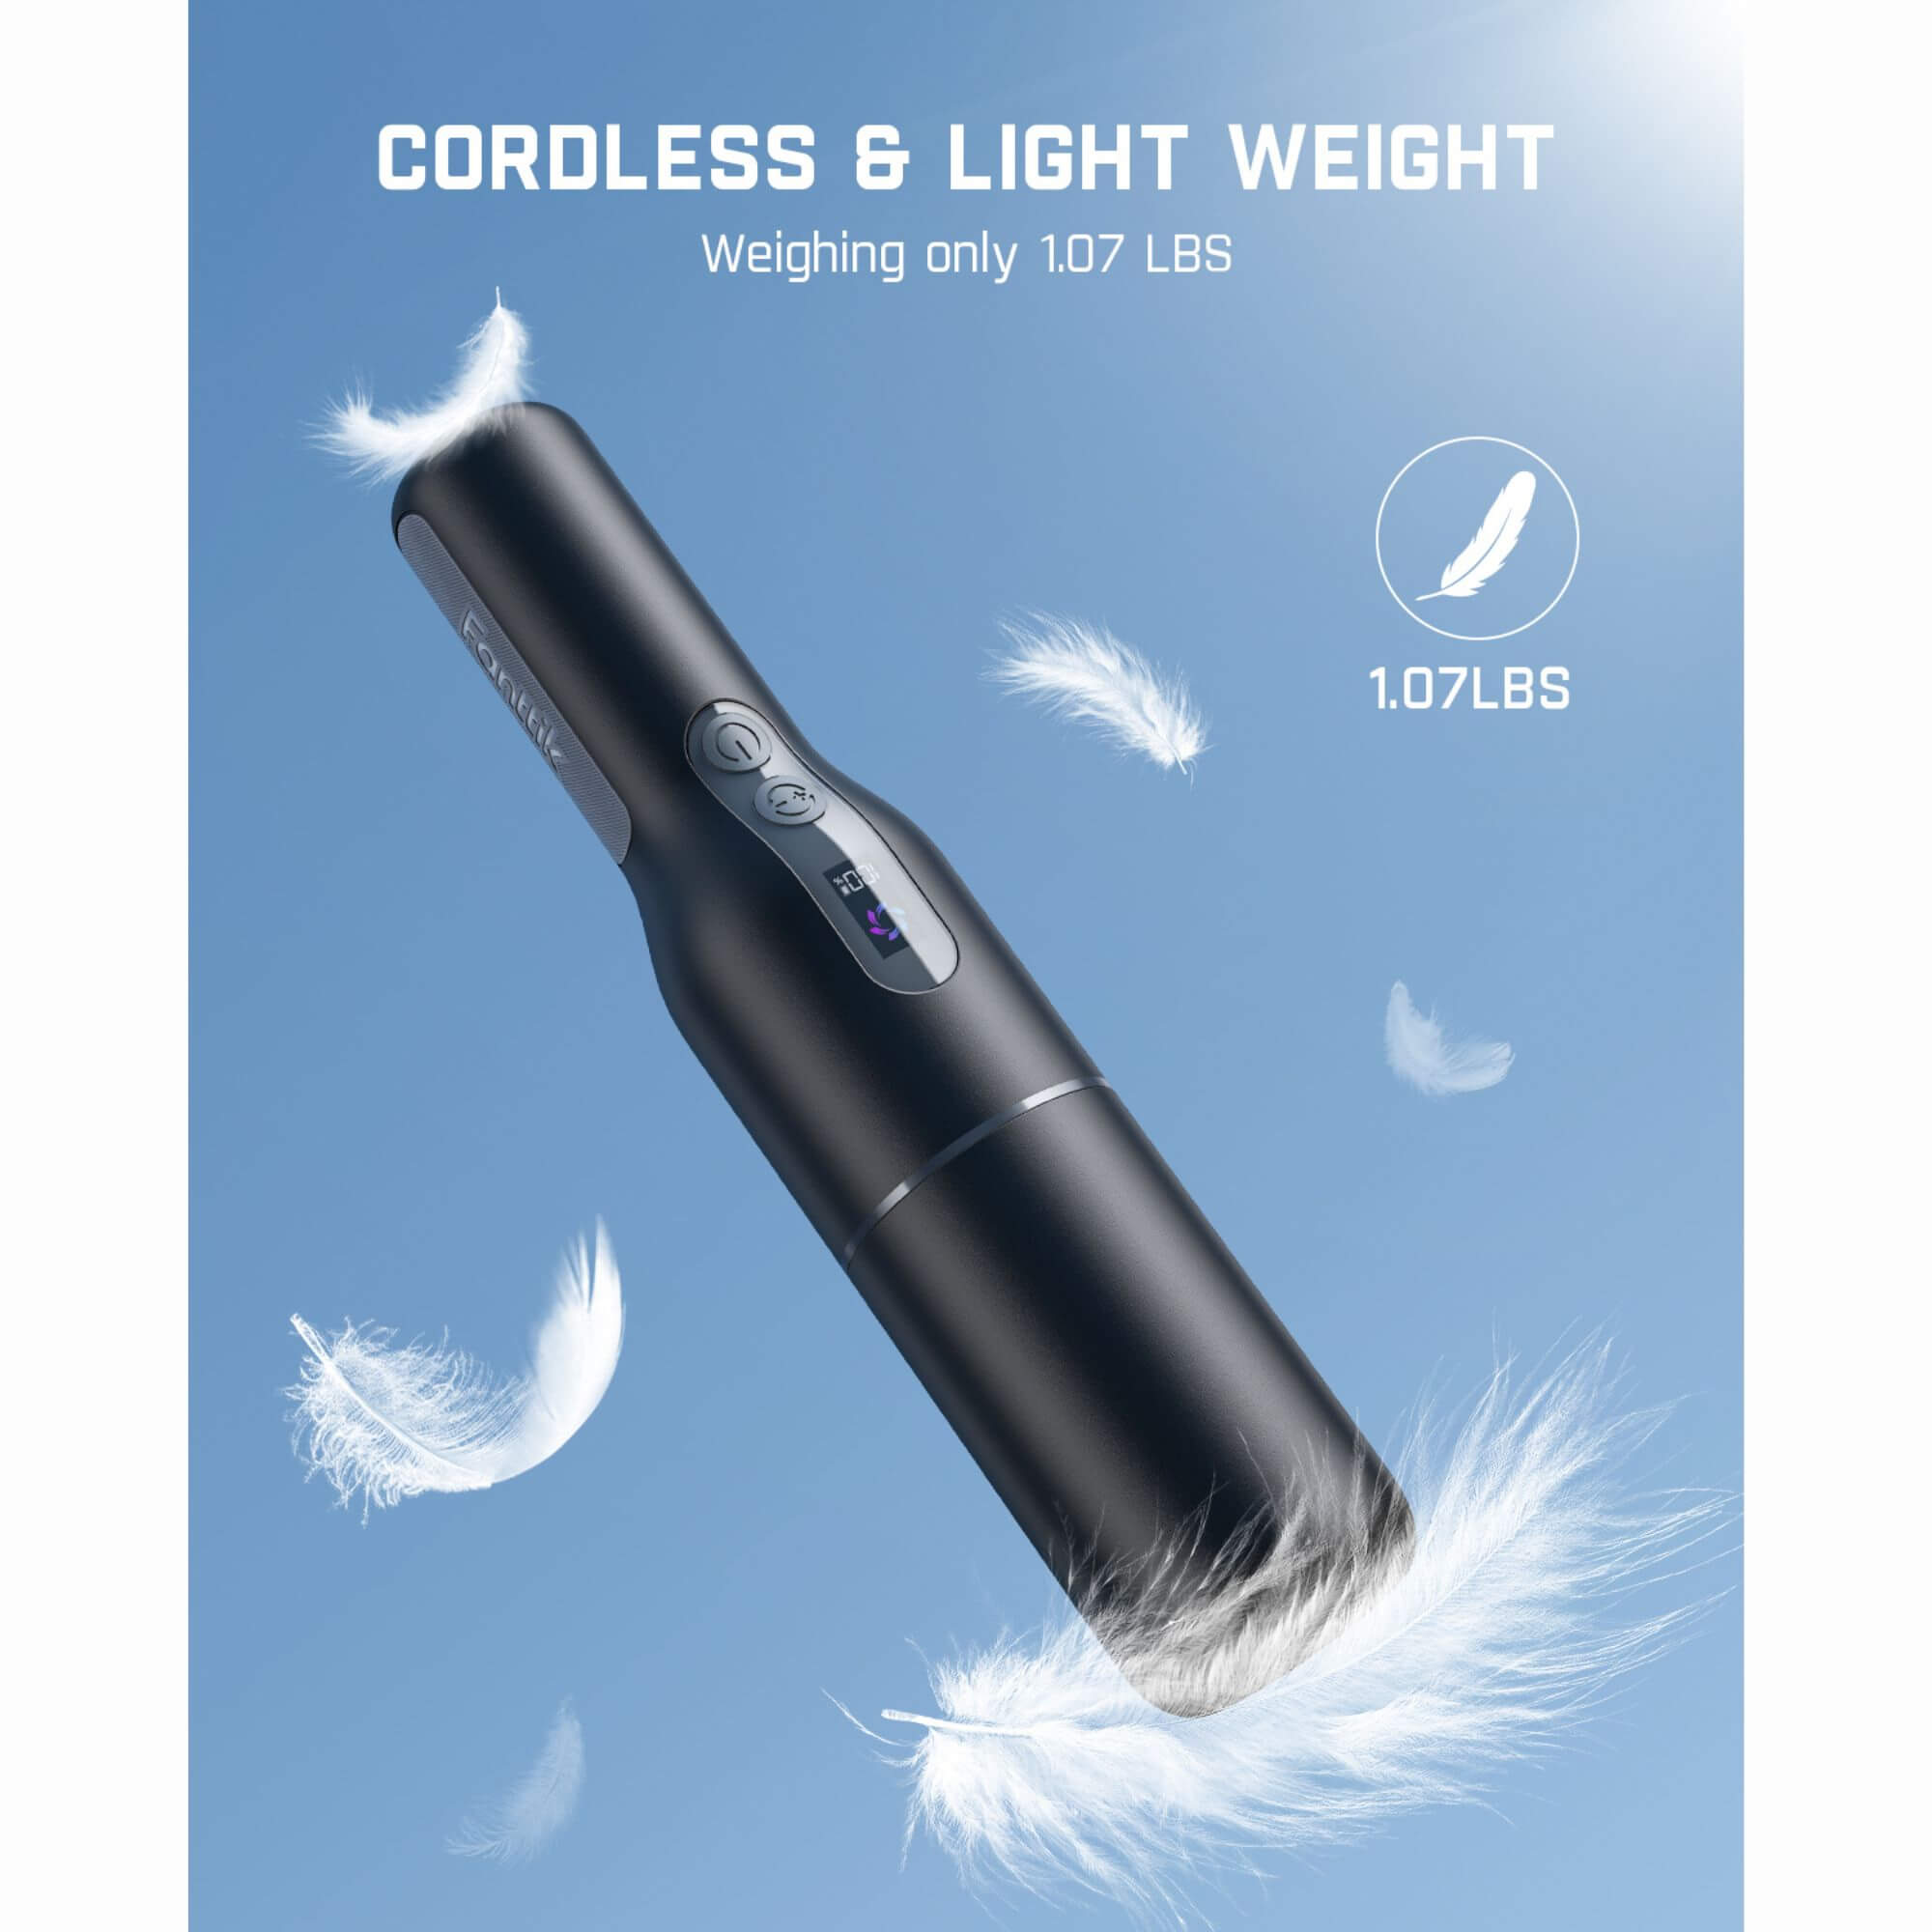 Weighing only 1 LB, Weighing only as light as one piece of chicken breast, the Fanttik V7 pocket cordless car vacuum combined with an ergonomic grip design and a non-slip handle, it's a breeze to complete the cleaning task